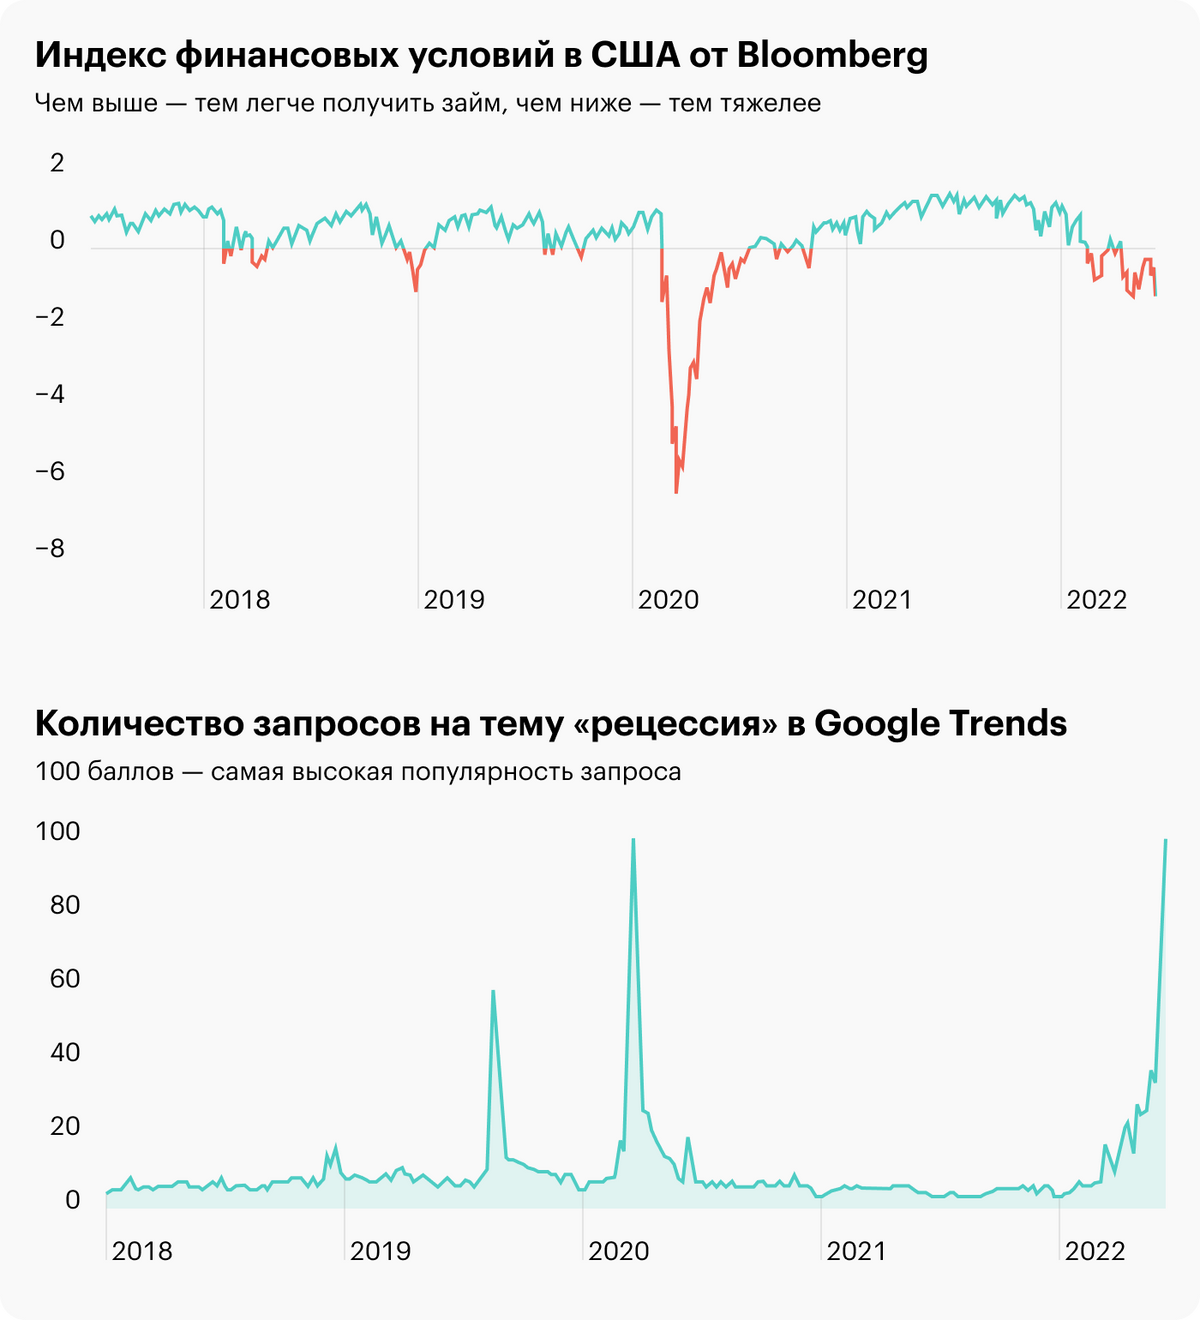 Источник: Daily Shot, Financial conditions tighten further, Google search frequency for “recession” surged in recent weeks